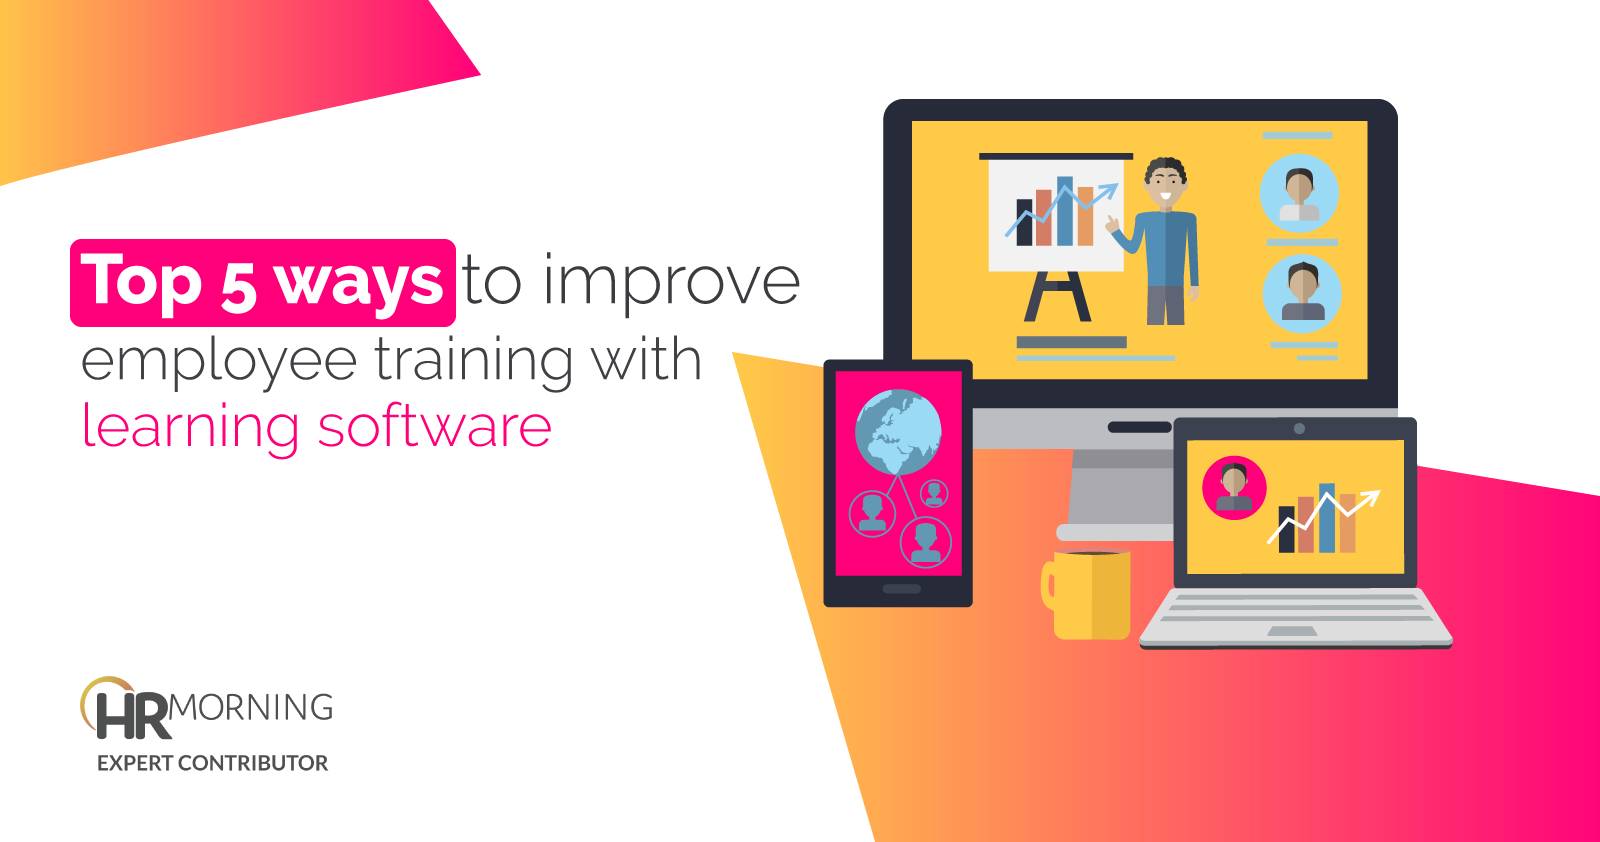 Top 5 ways to improve employee training with learning software